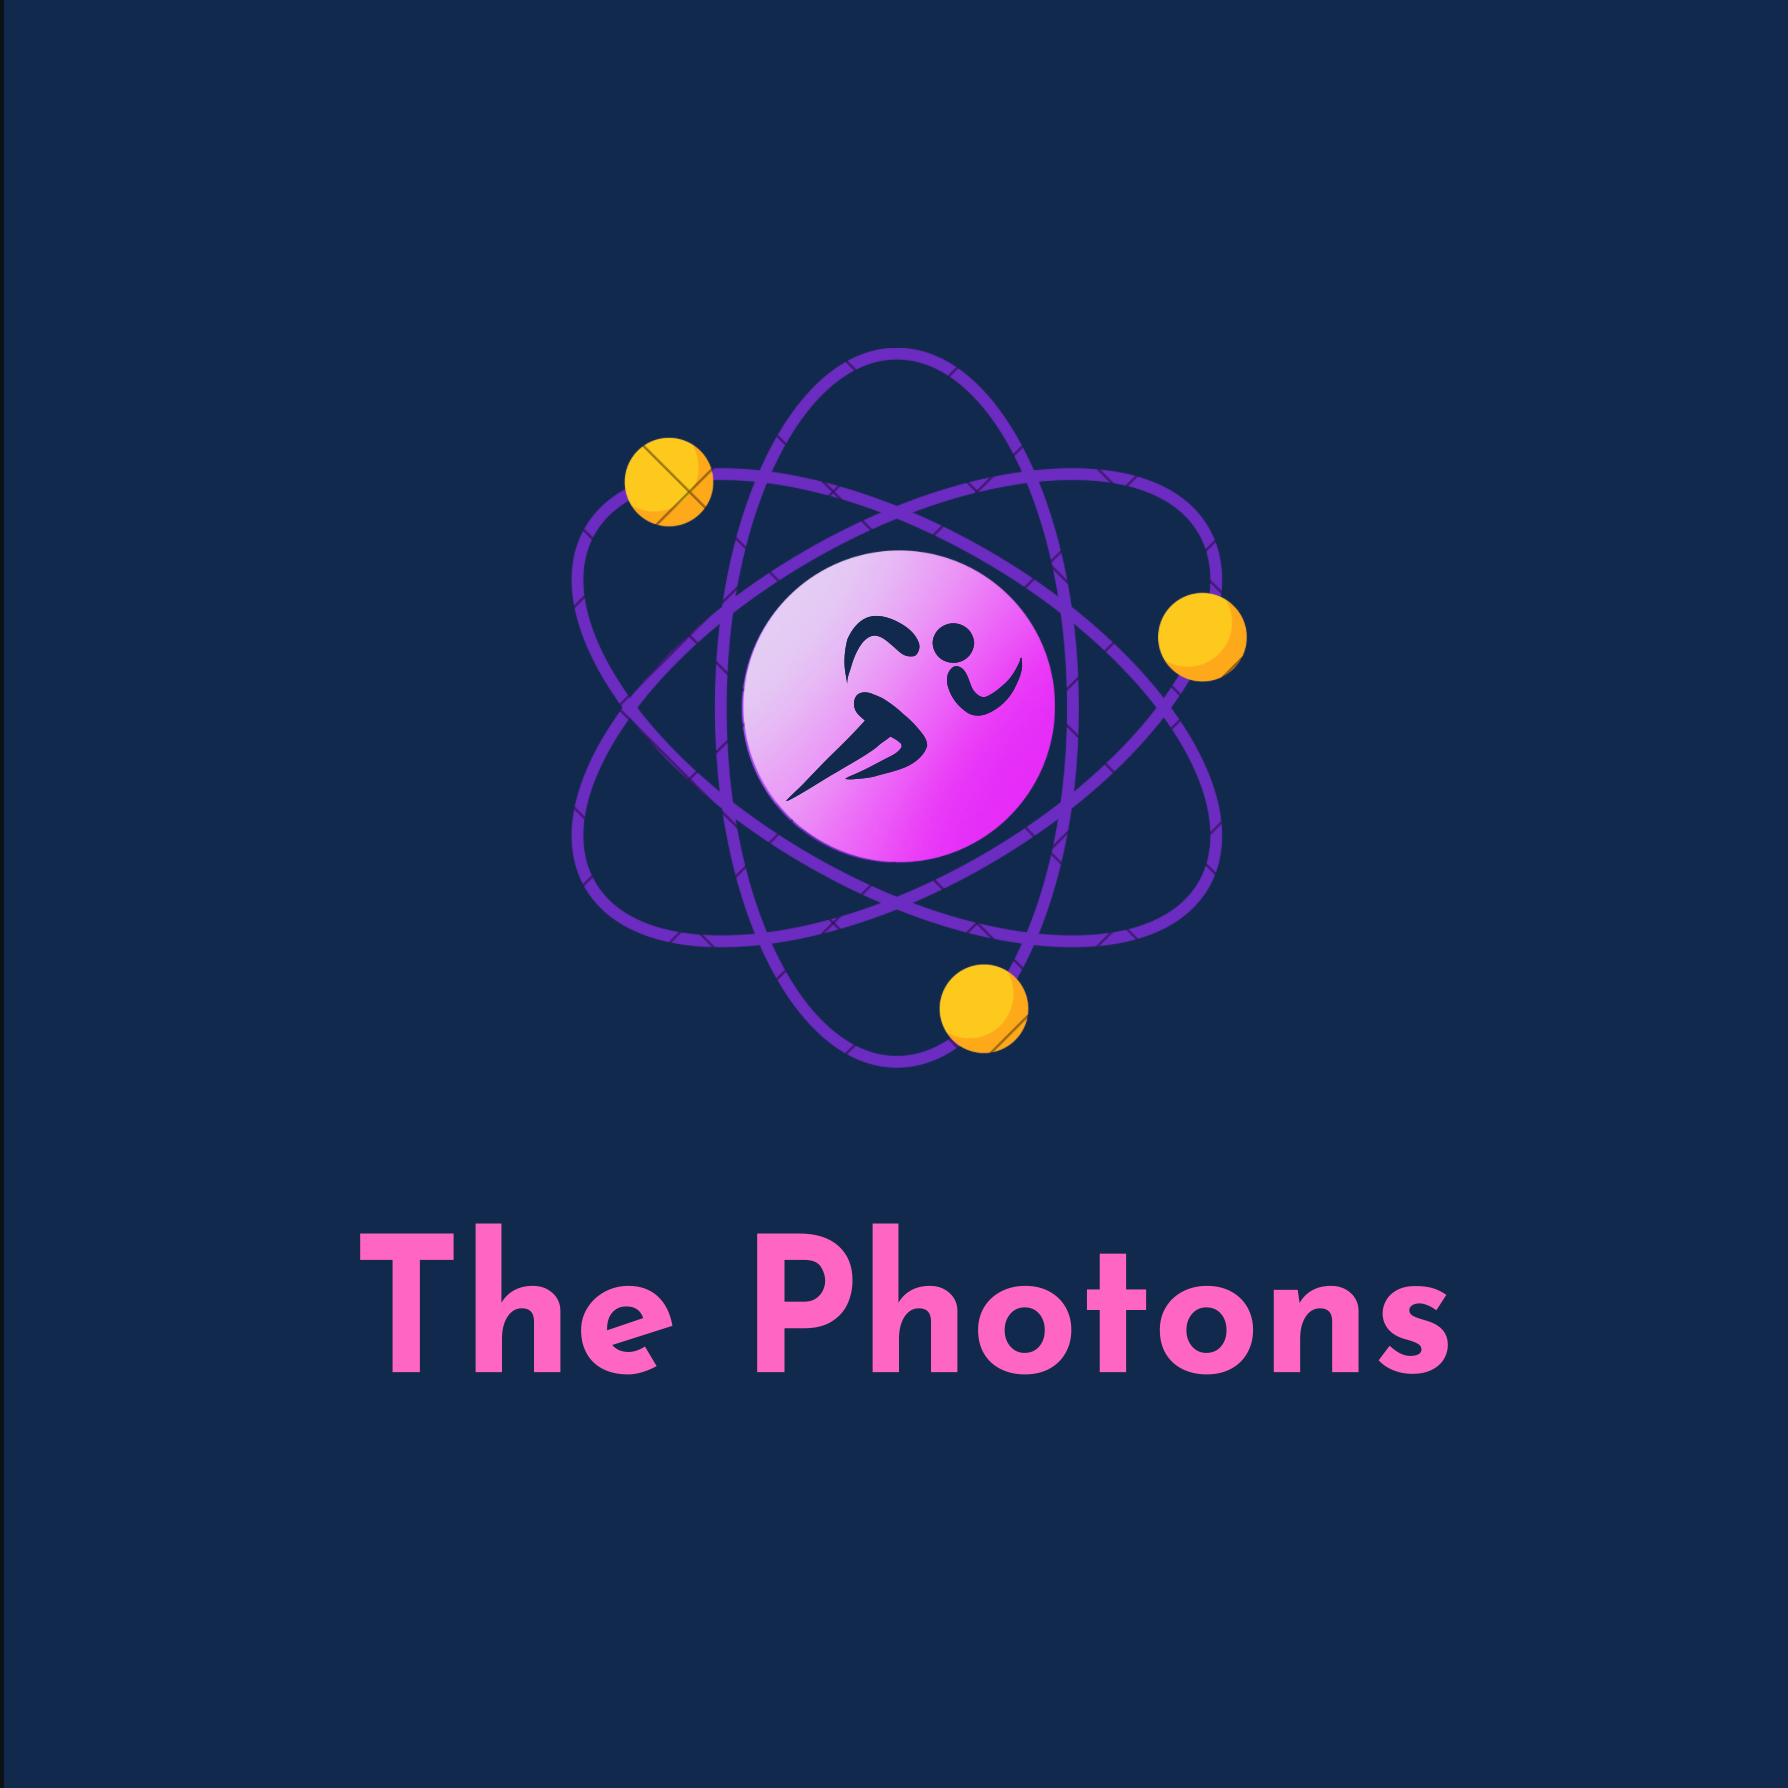 The Photons